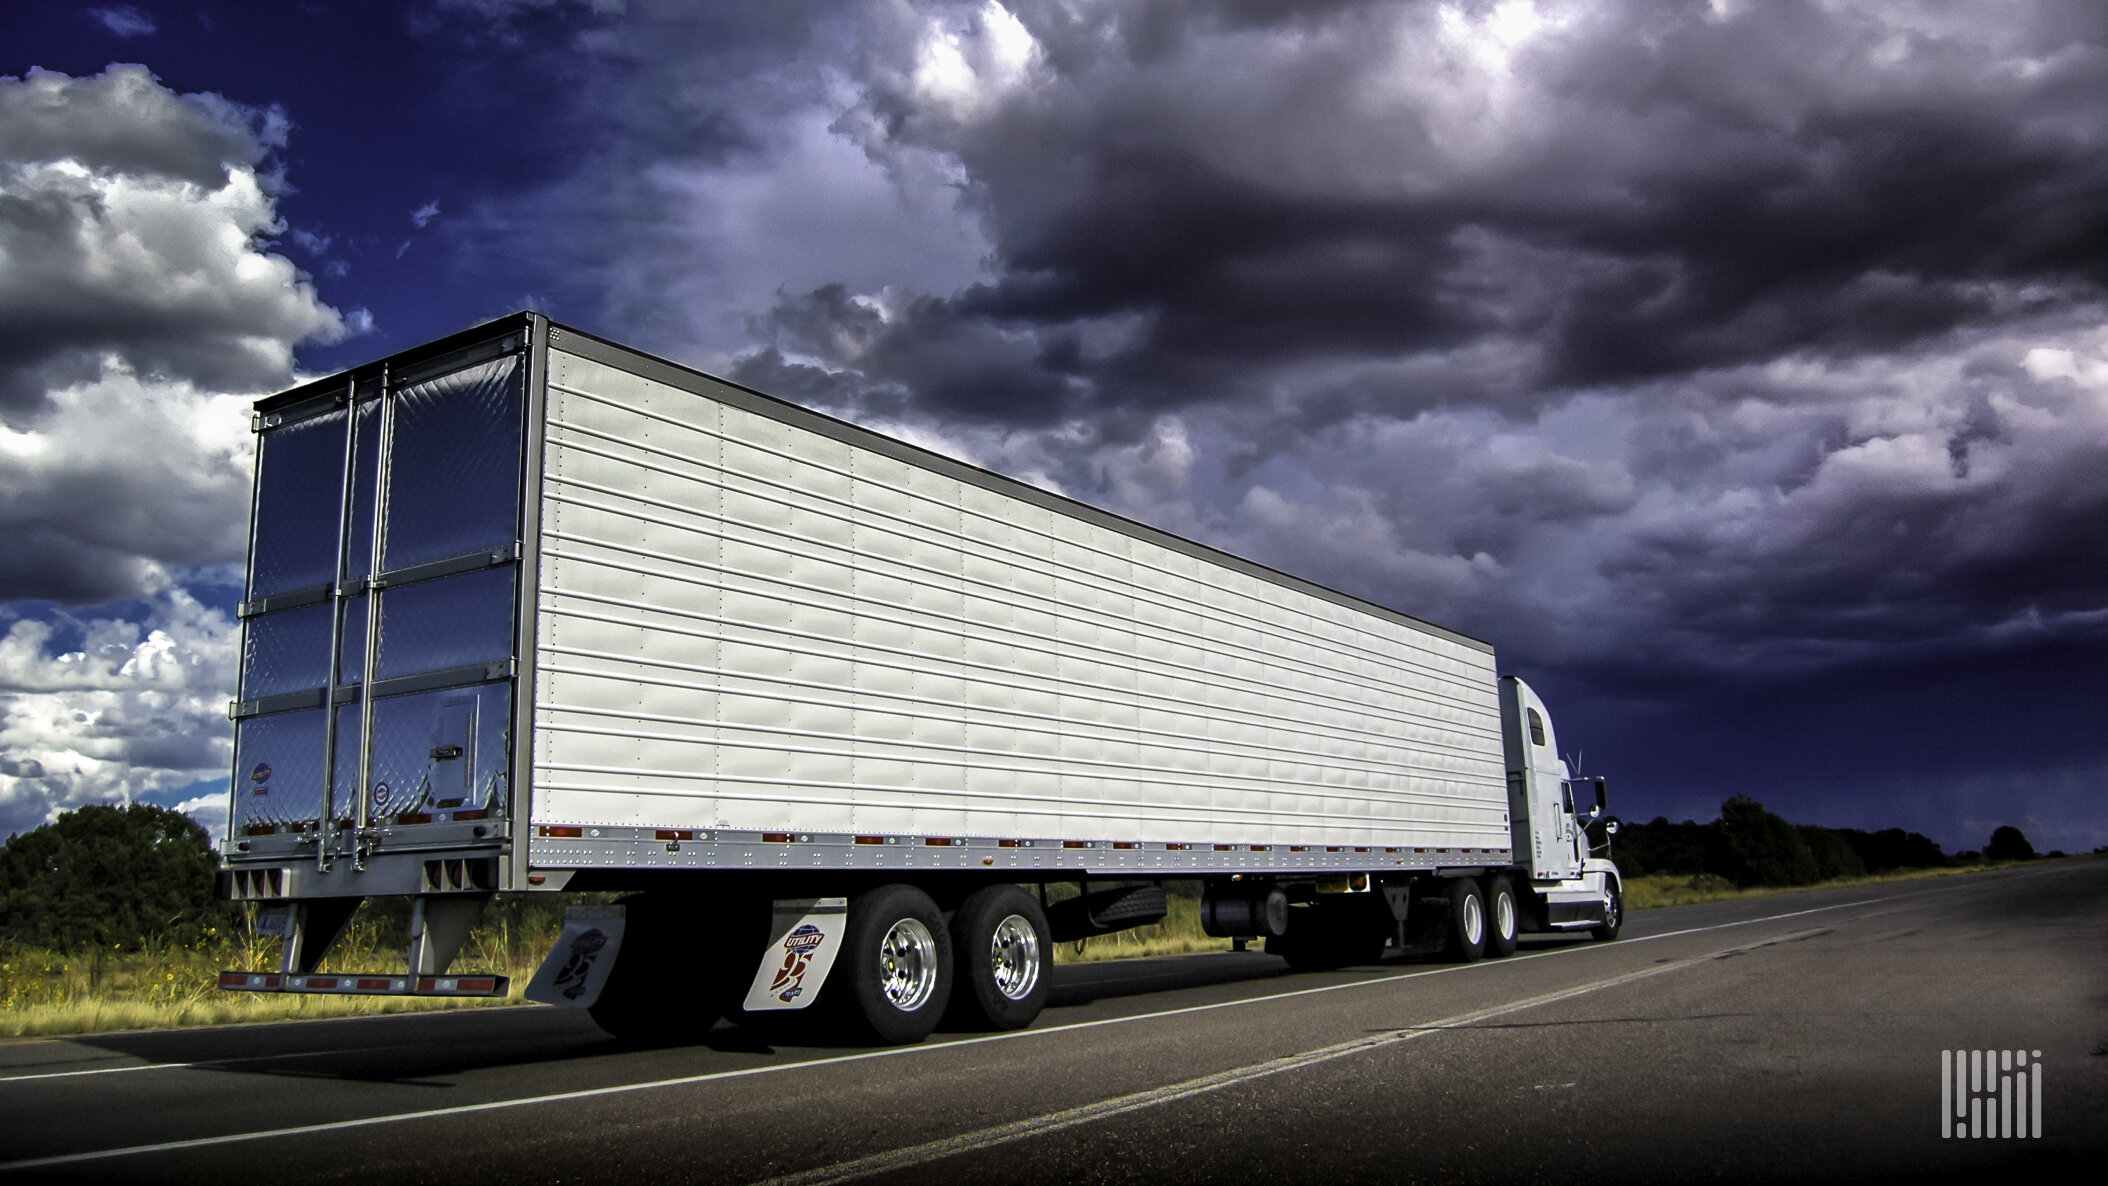 Respondents to its latest survey tell Morgan Stanley that the freight markets are unpredictable right now, and the outlook over the next three months remains cloudy at best. (Photo: Jim Allen/FreightWaves)